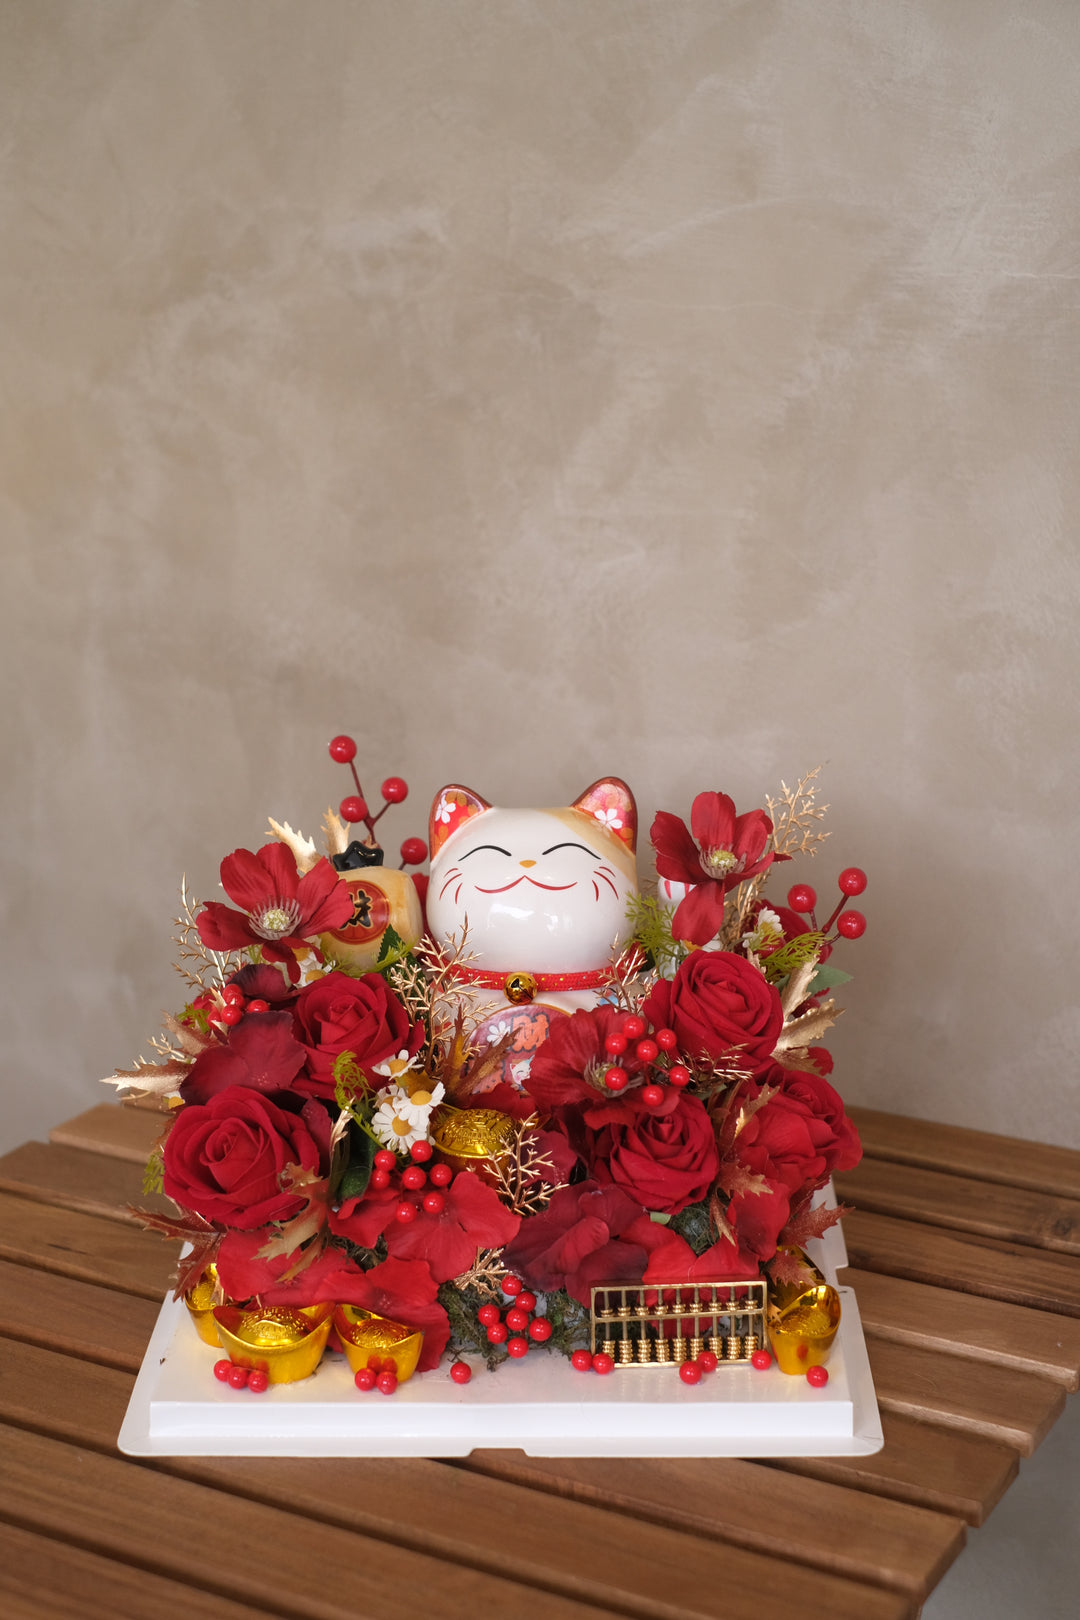 <p><meta charset="utf-8"><span>Lucky cats, also known as Maneki-neko, are believed to bring good luck and prosperity. Combining them with artificial flowers symbolizes a wish for success and positive outcomes in the new venture.</span></p>